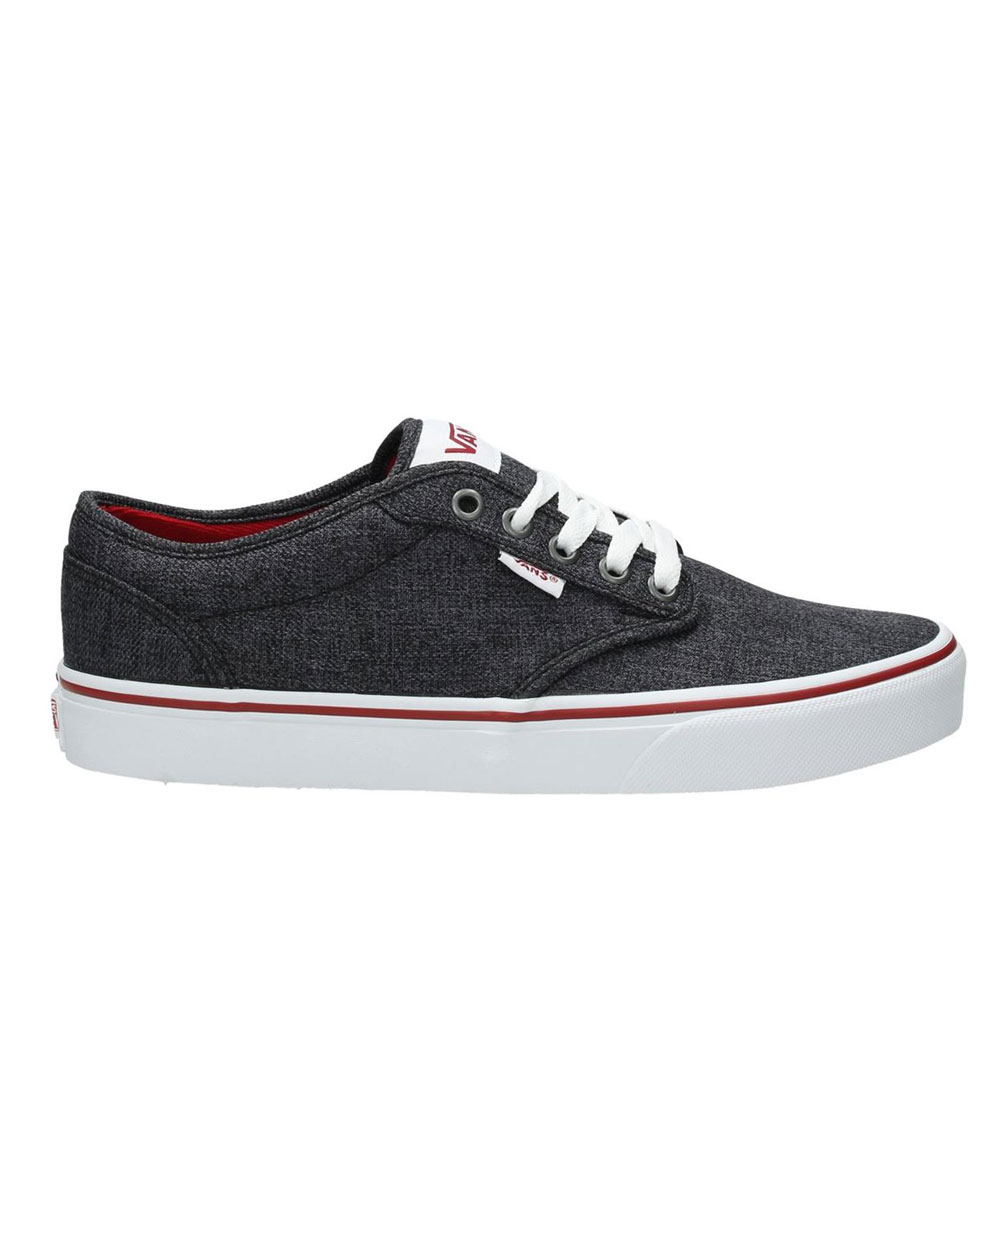 Vans Atwood (black/red) | Extra Tall 